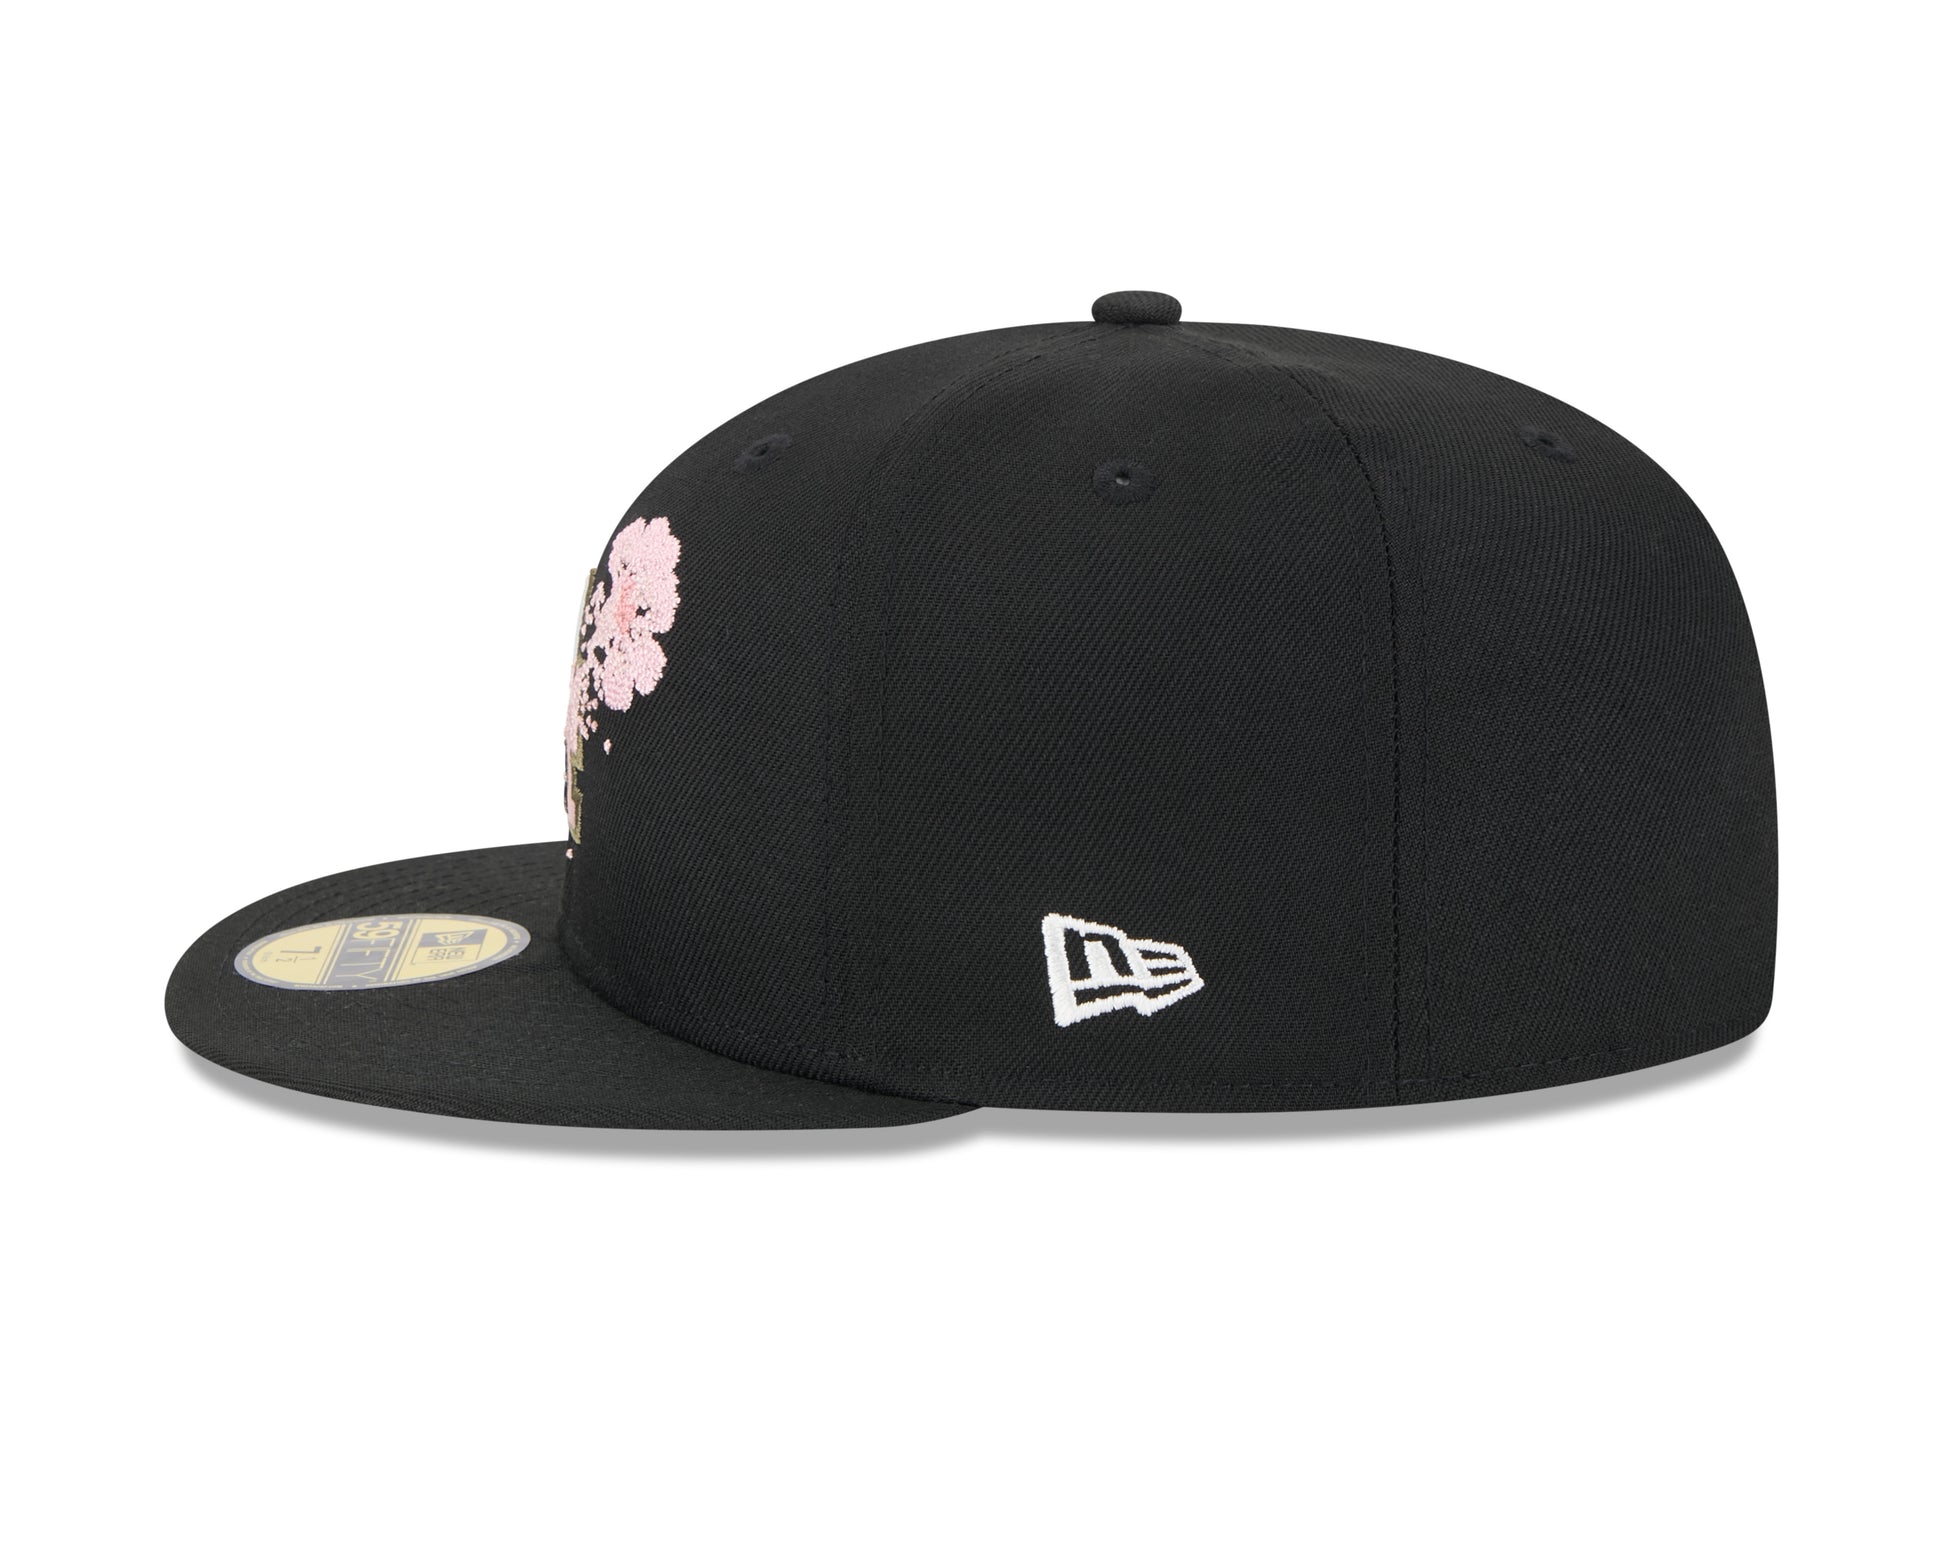 New Era - 59fifty Fitted Cap - Los Angeles Dodgers - DOTTED FLORAL - Black - Headz Up 